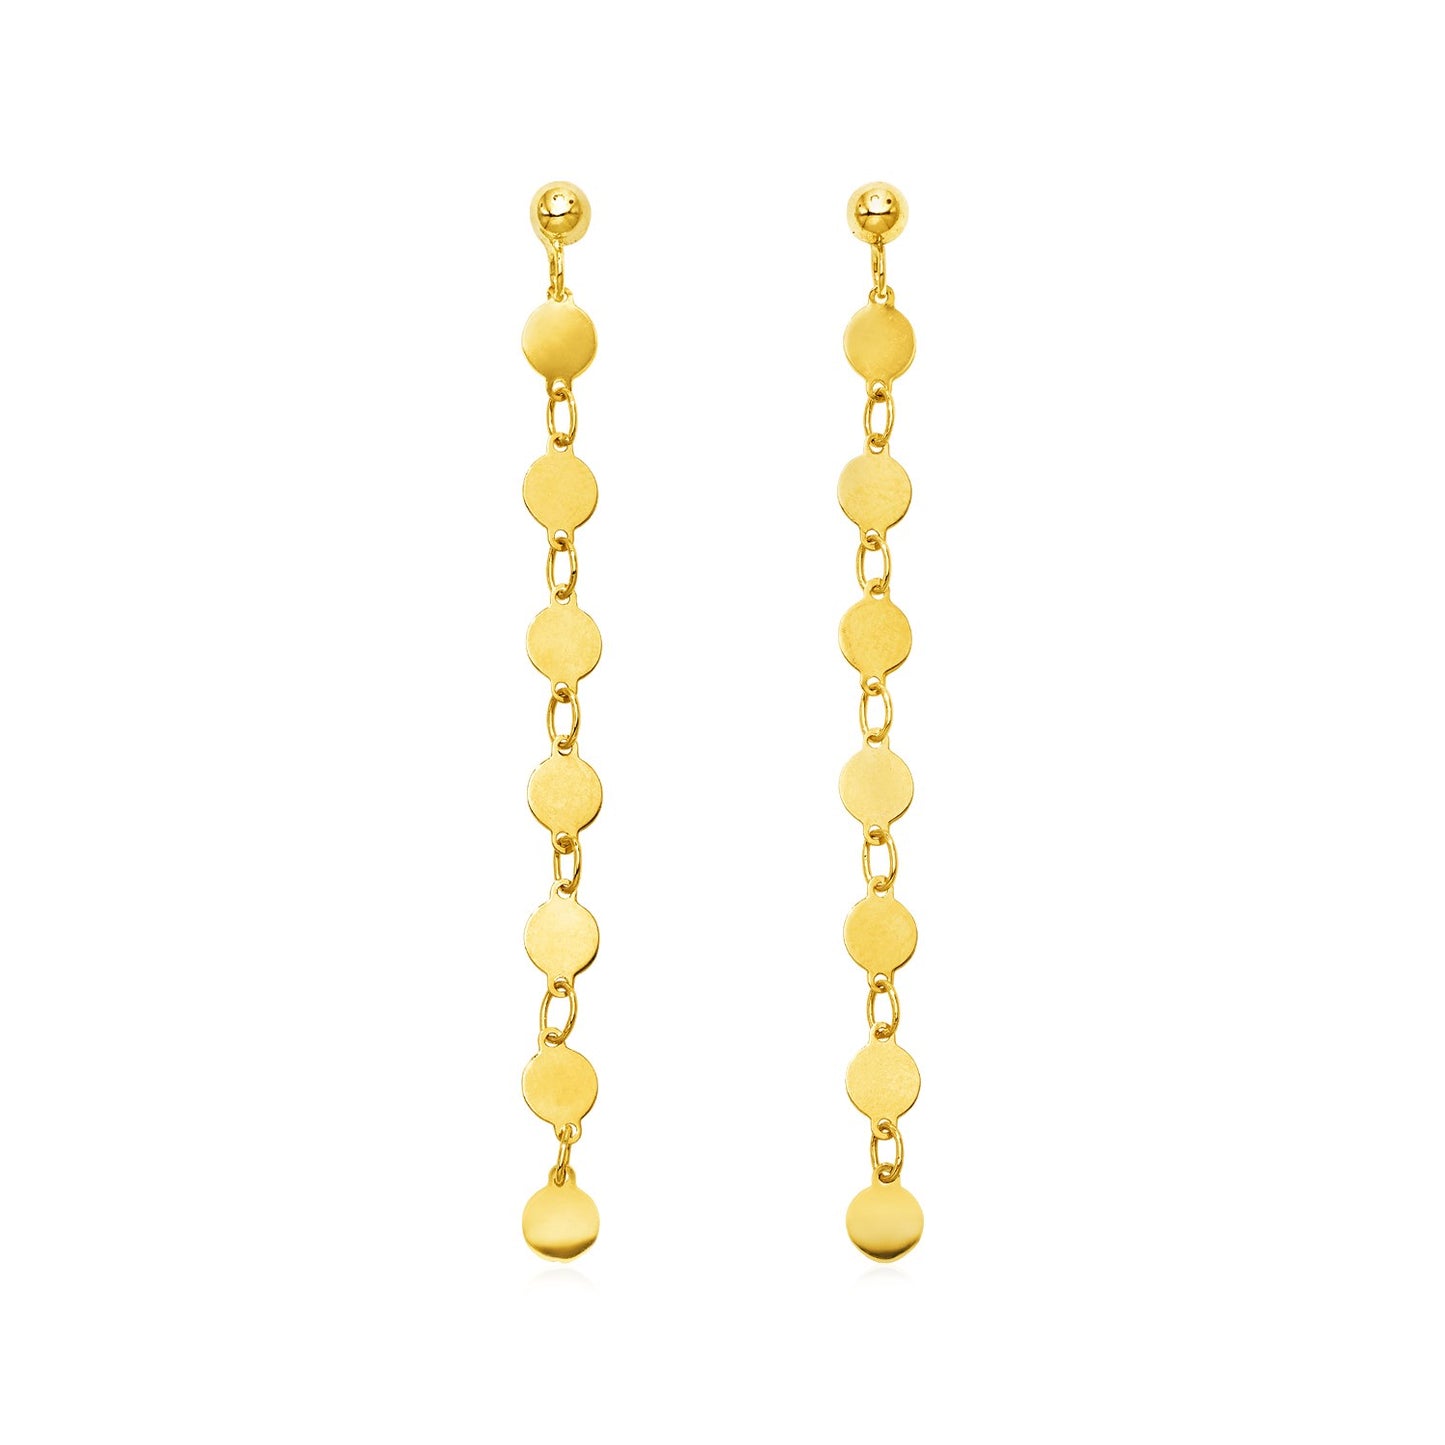 Polished Circles Earrings in 14k Yellow Gold